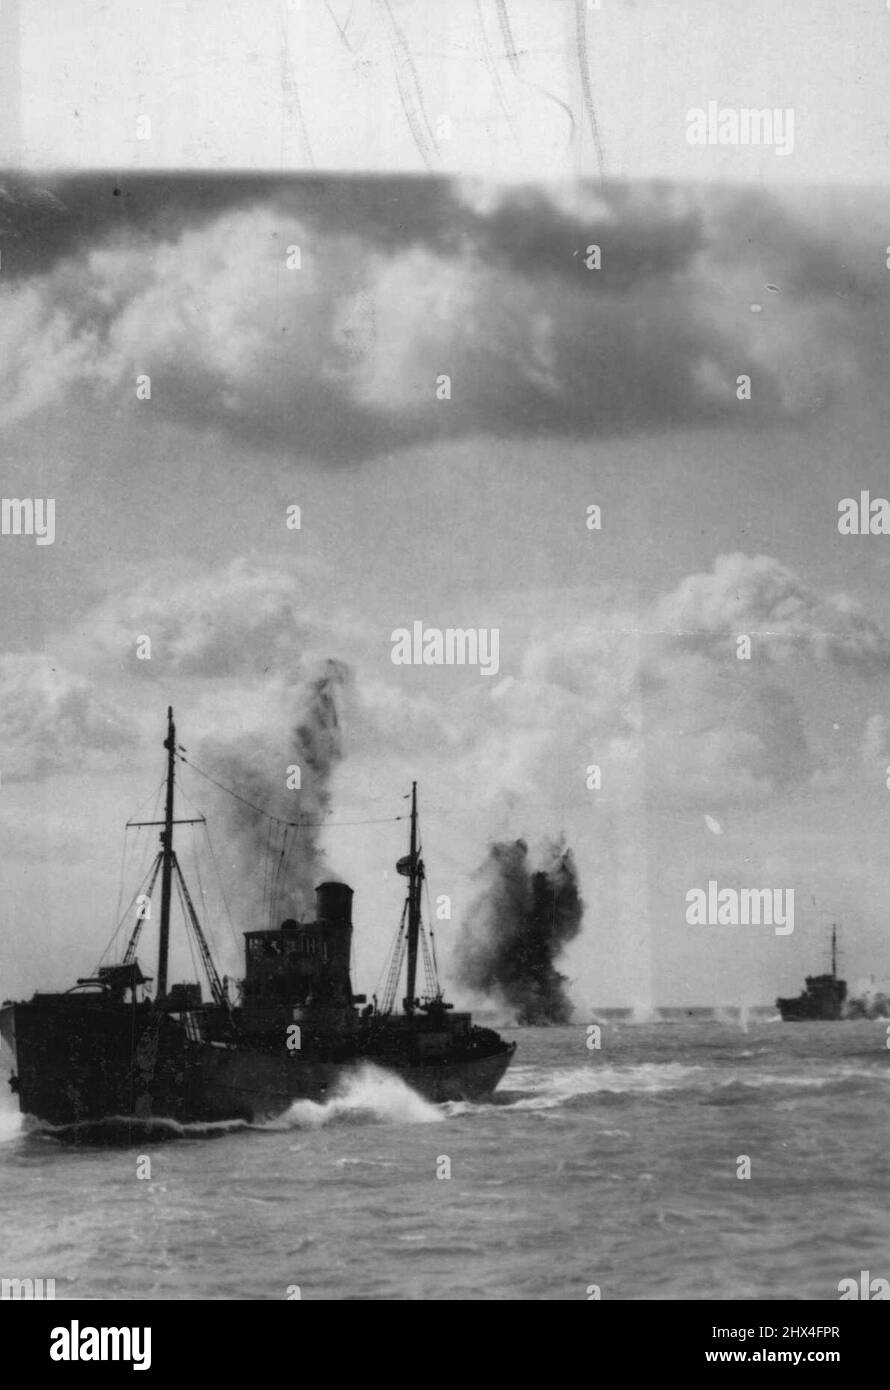 Channel Convoy Shelled By The Germans: Another burst closer, between two ships but still another miss. ***** pictures of the Channel convoy shelling taken from one of the escorting warships, they show how the German Gunners tried to find the range. and missed. November 05, 1940. (Photo by Keystone). Stock Photo